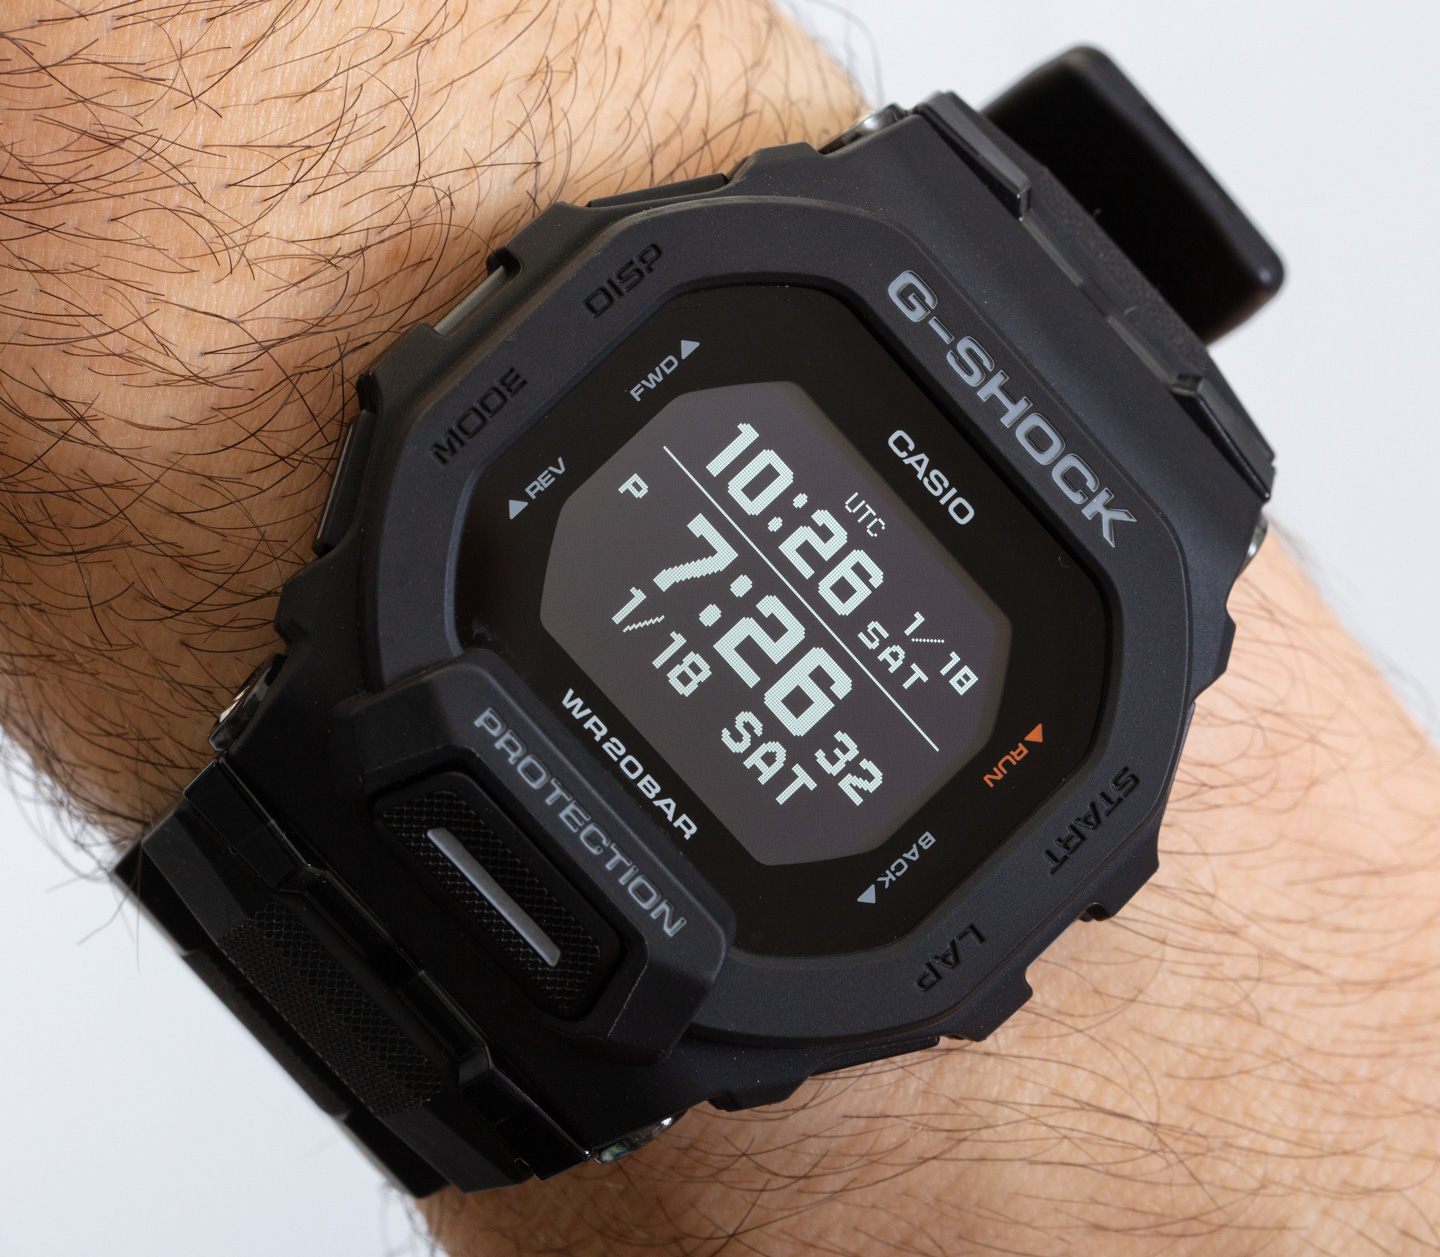 Review: GBD200 Entry-Level Bluetooth G-Shock MOVE aBlogtoWatch